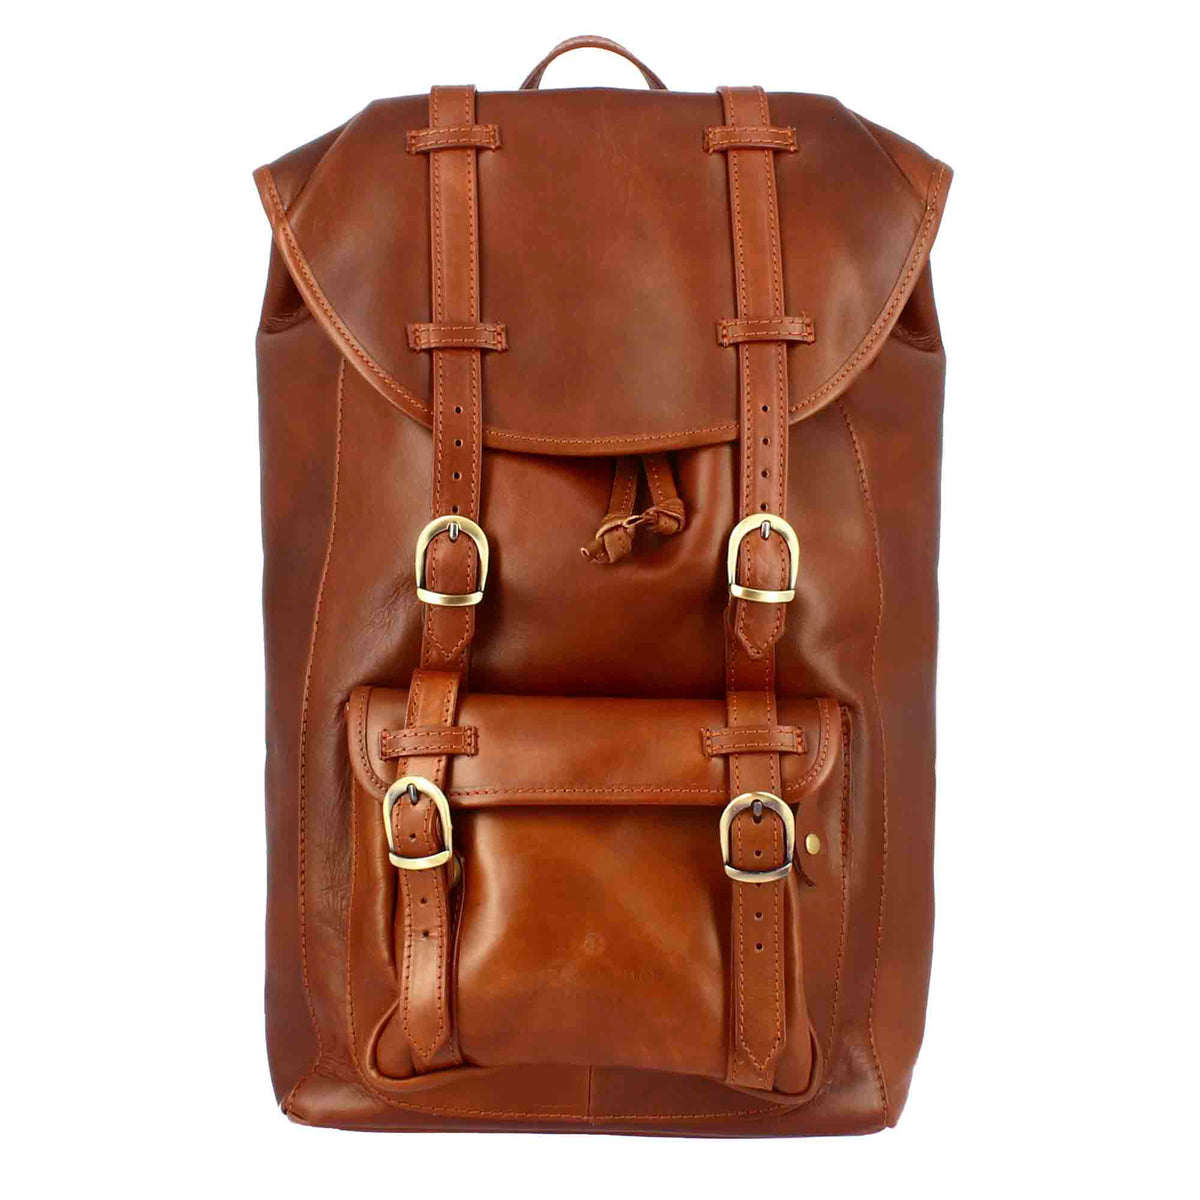 Brown leather travel backpack with buckles